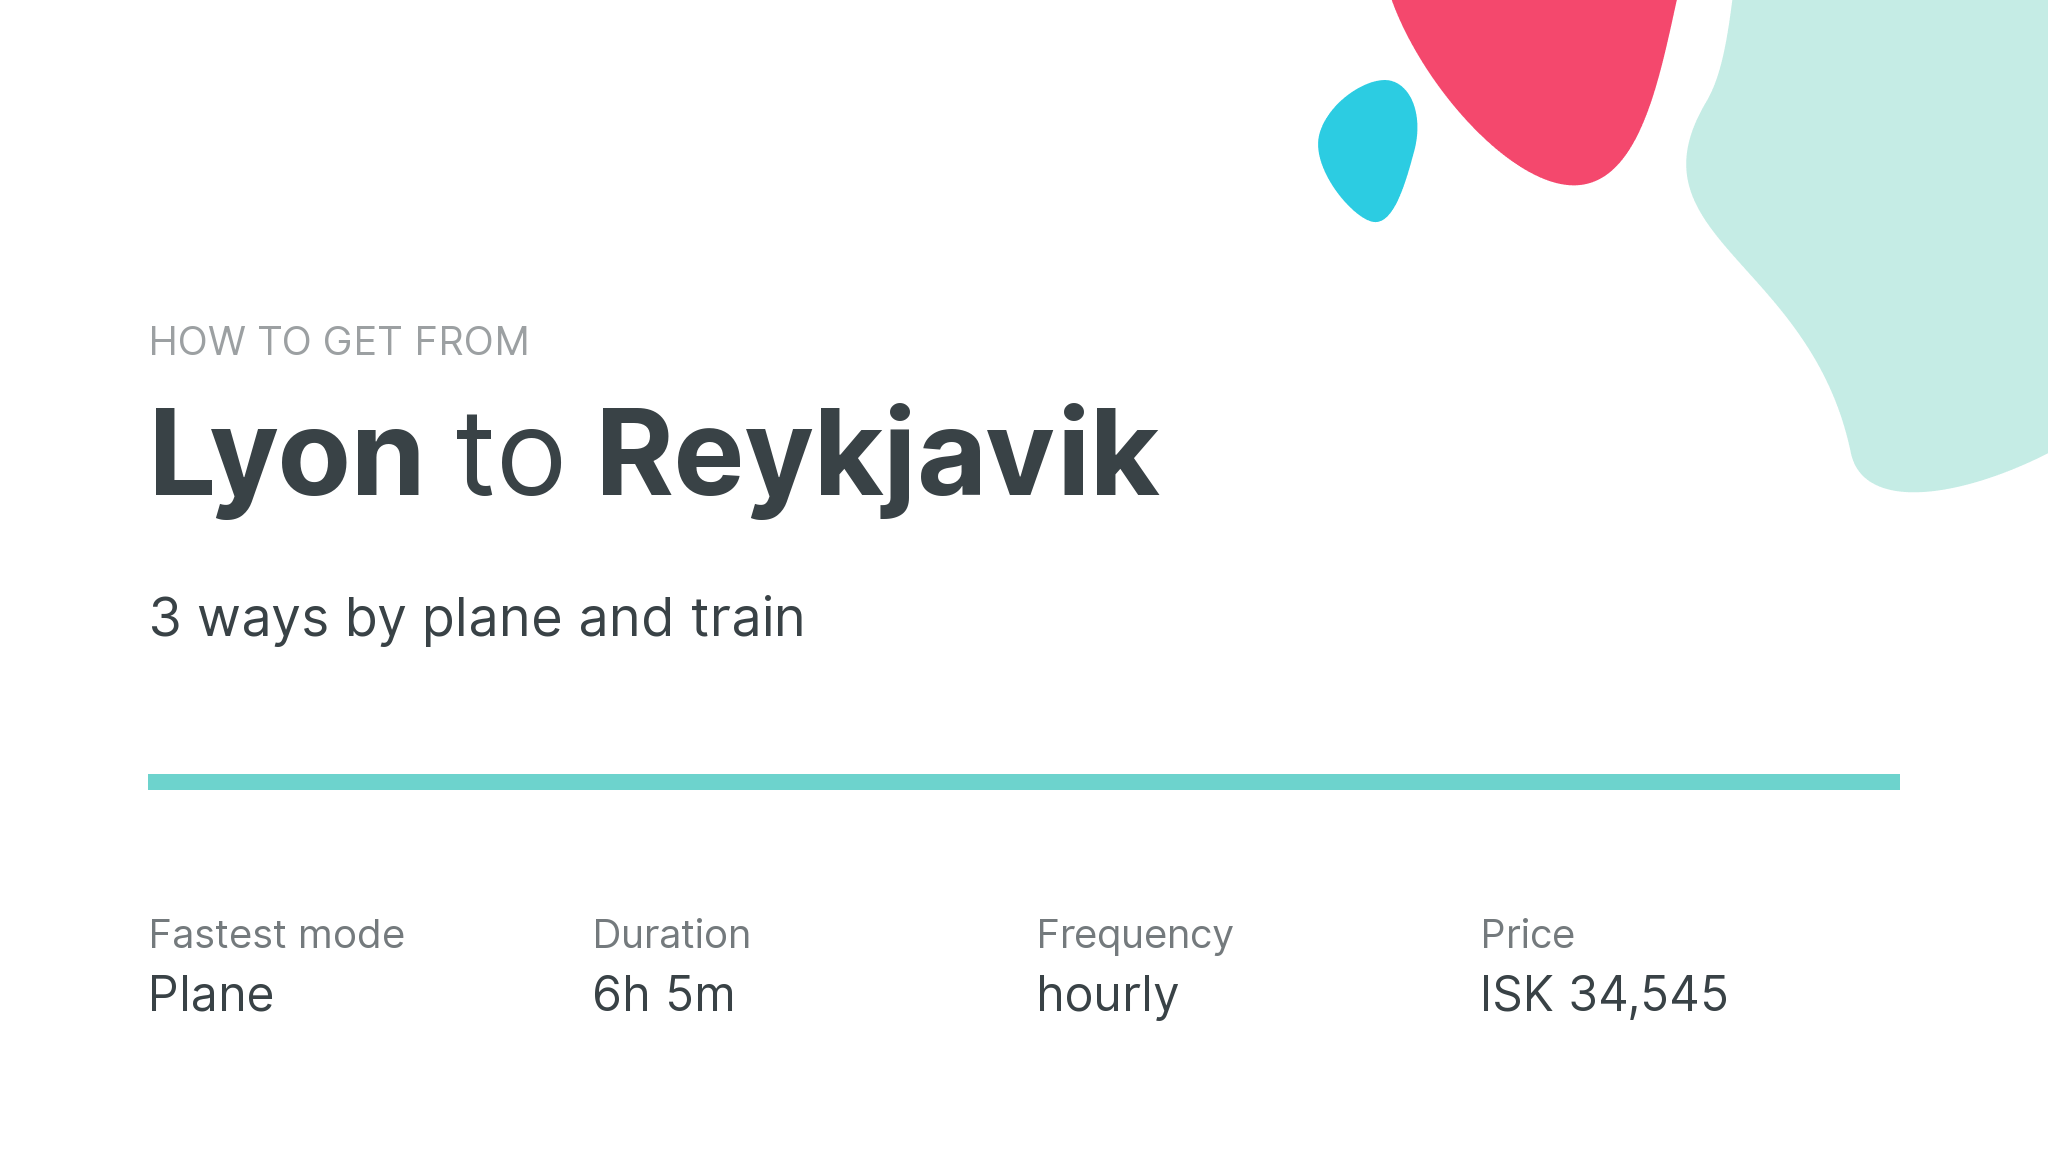 How do I get from Lyon to Reykjavik